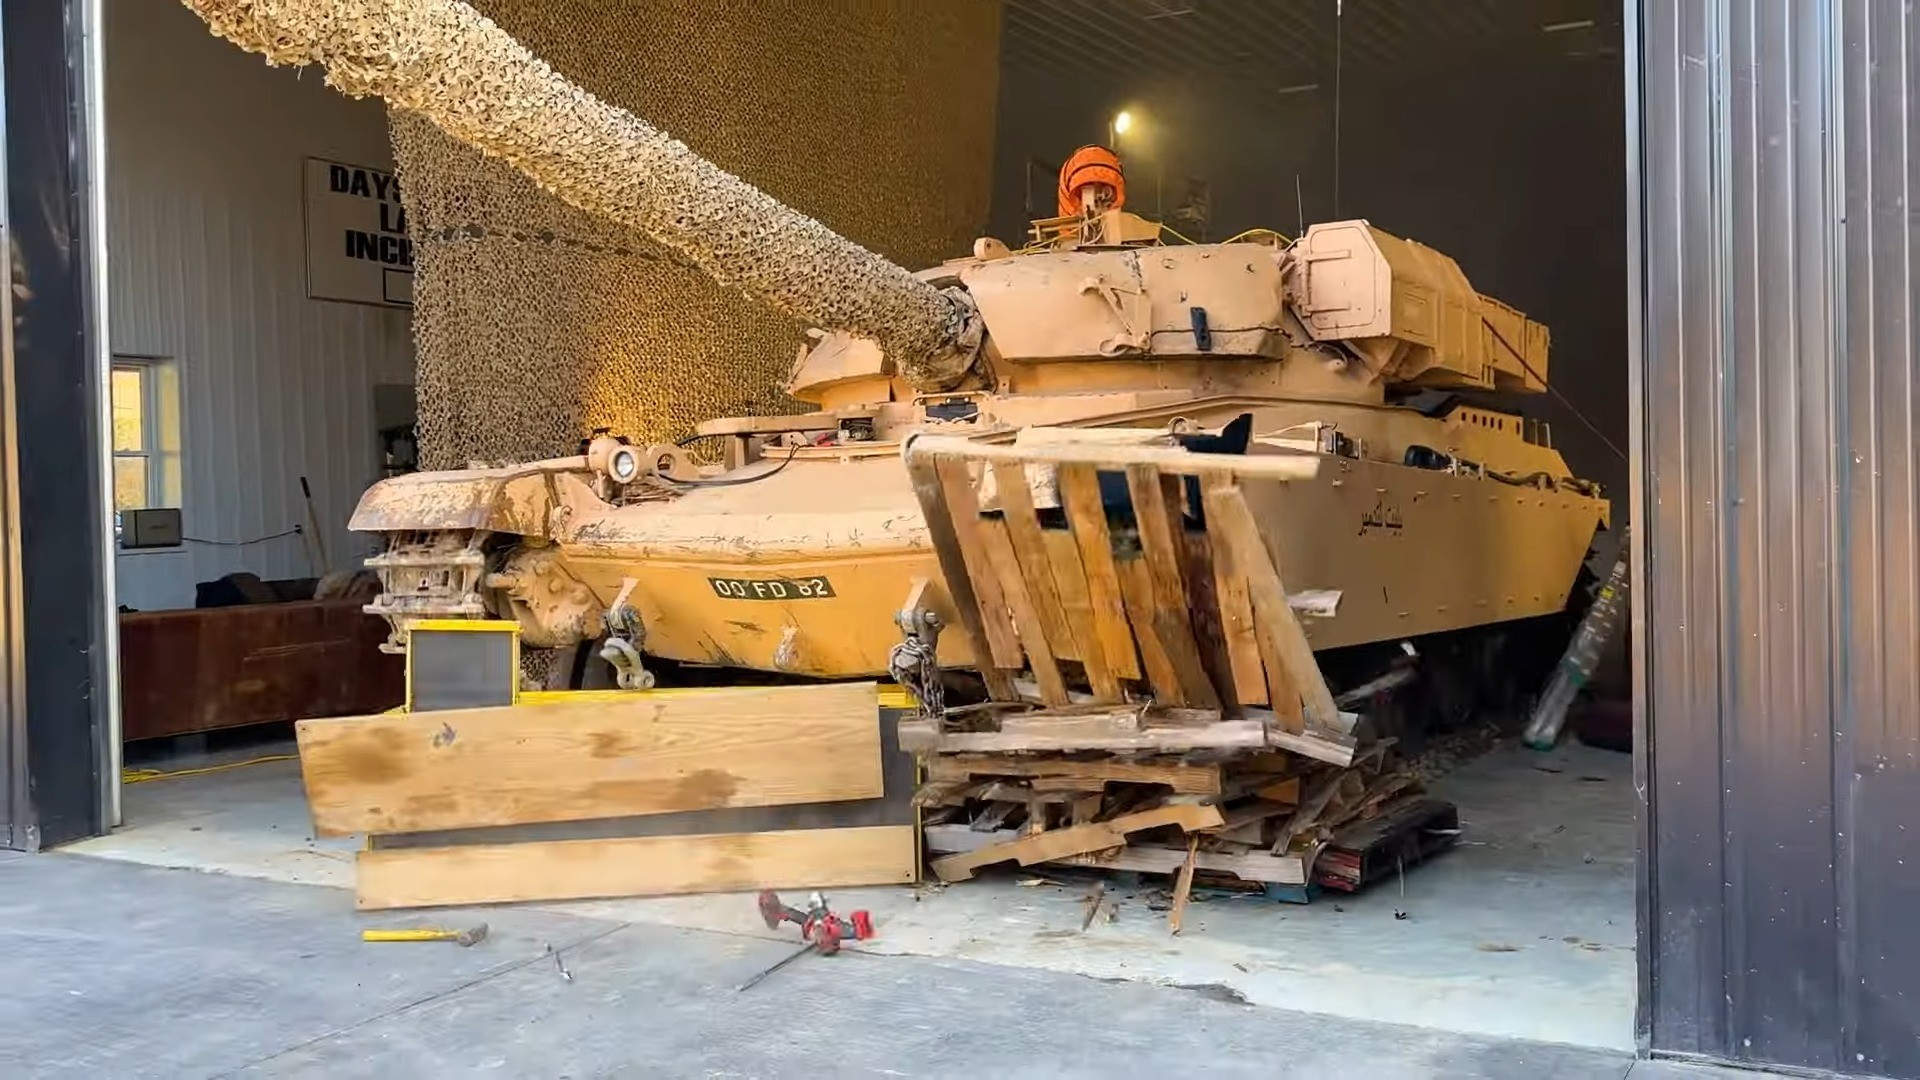 Texas: Remote-Controlled Full-Size Battle Tank Smashes Things for